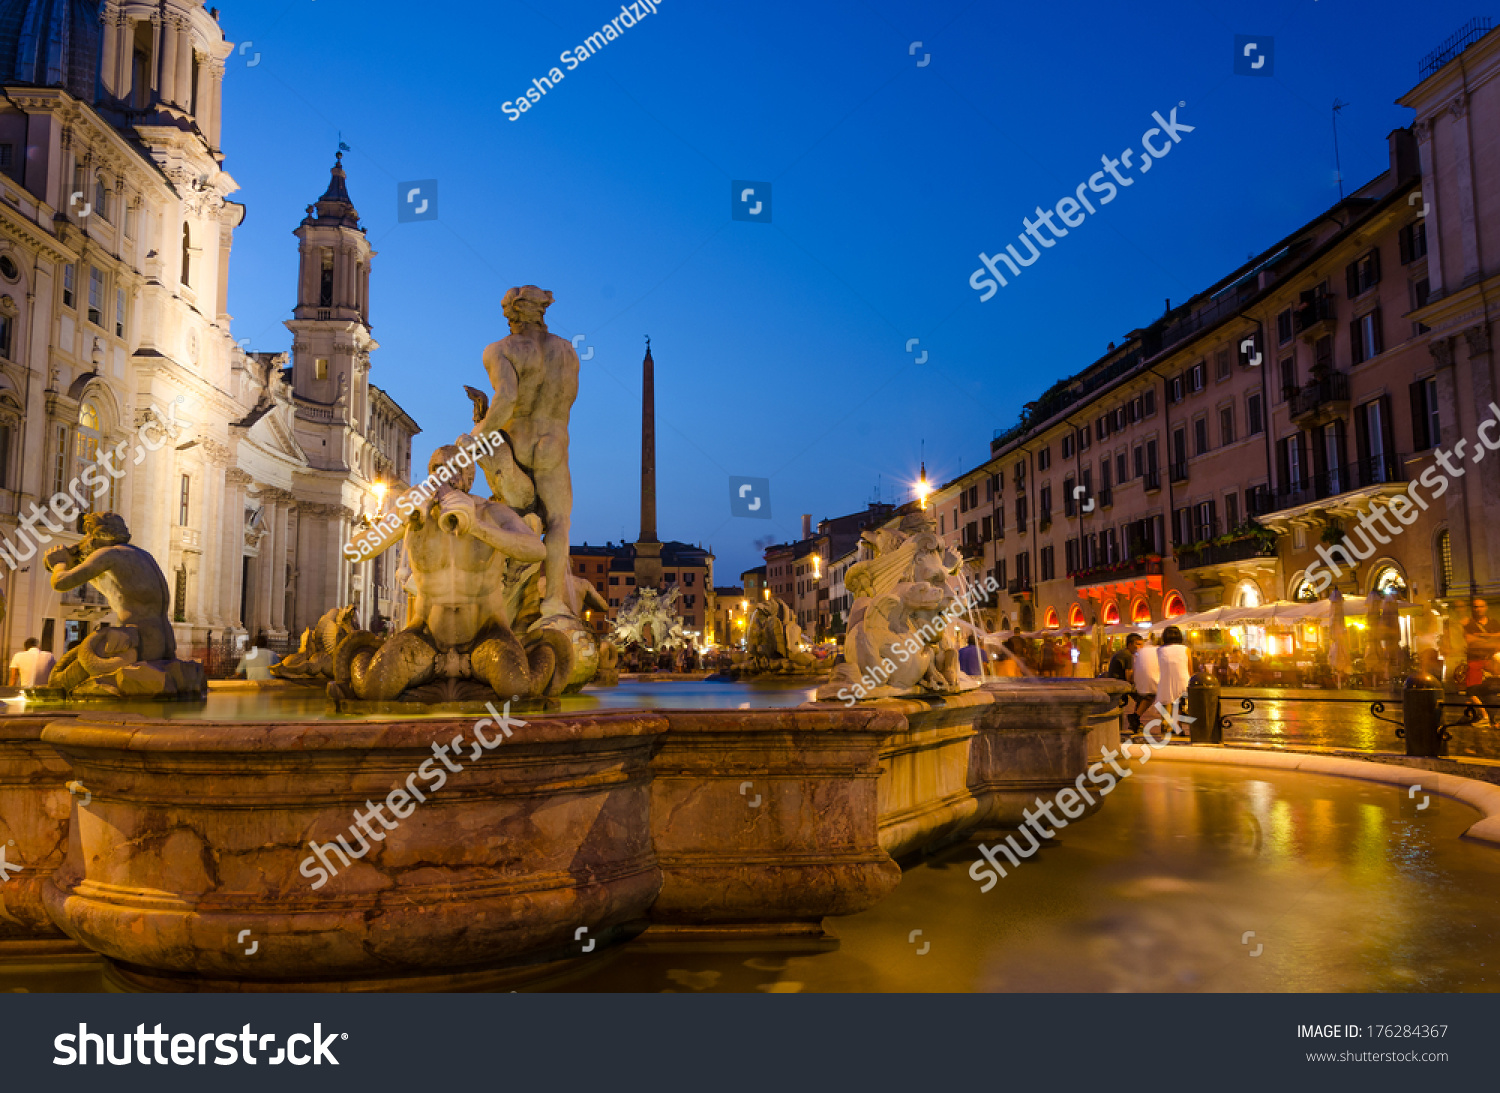 Piazza Navona By Night After Sunset Stock Photo (Edit Now) 176284367